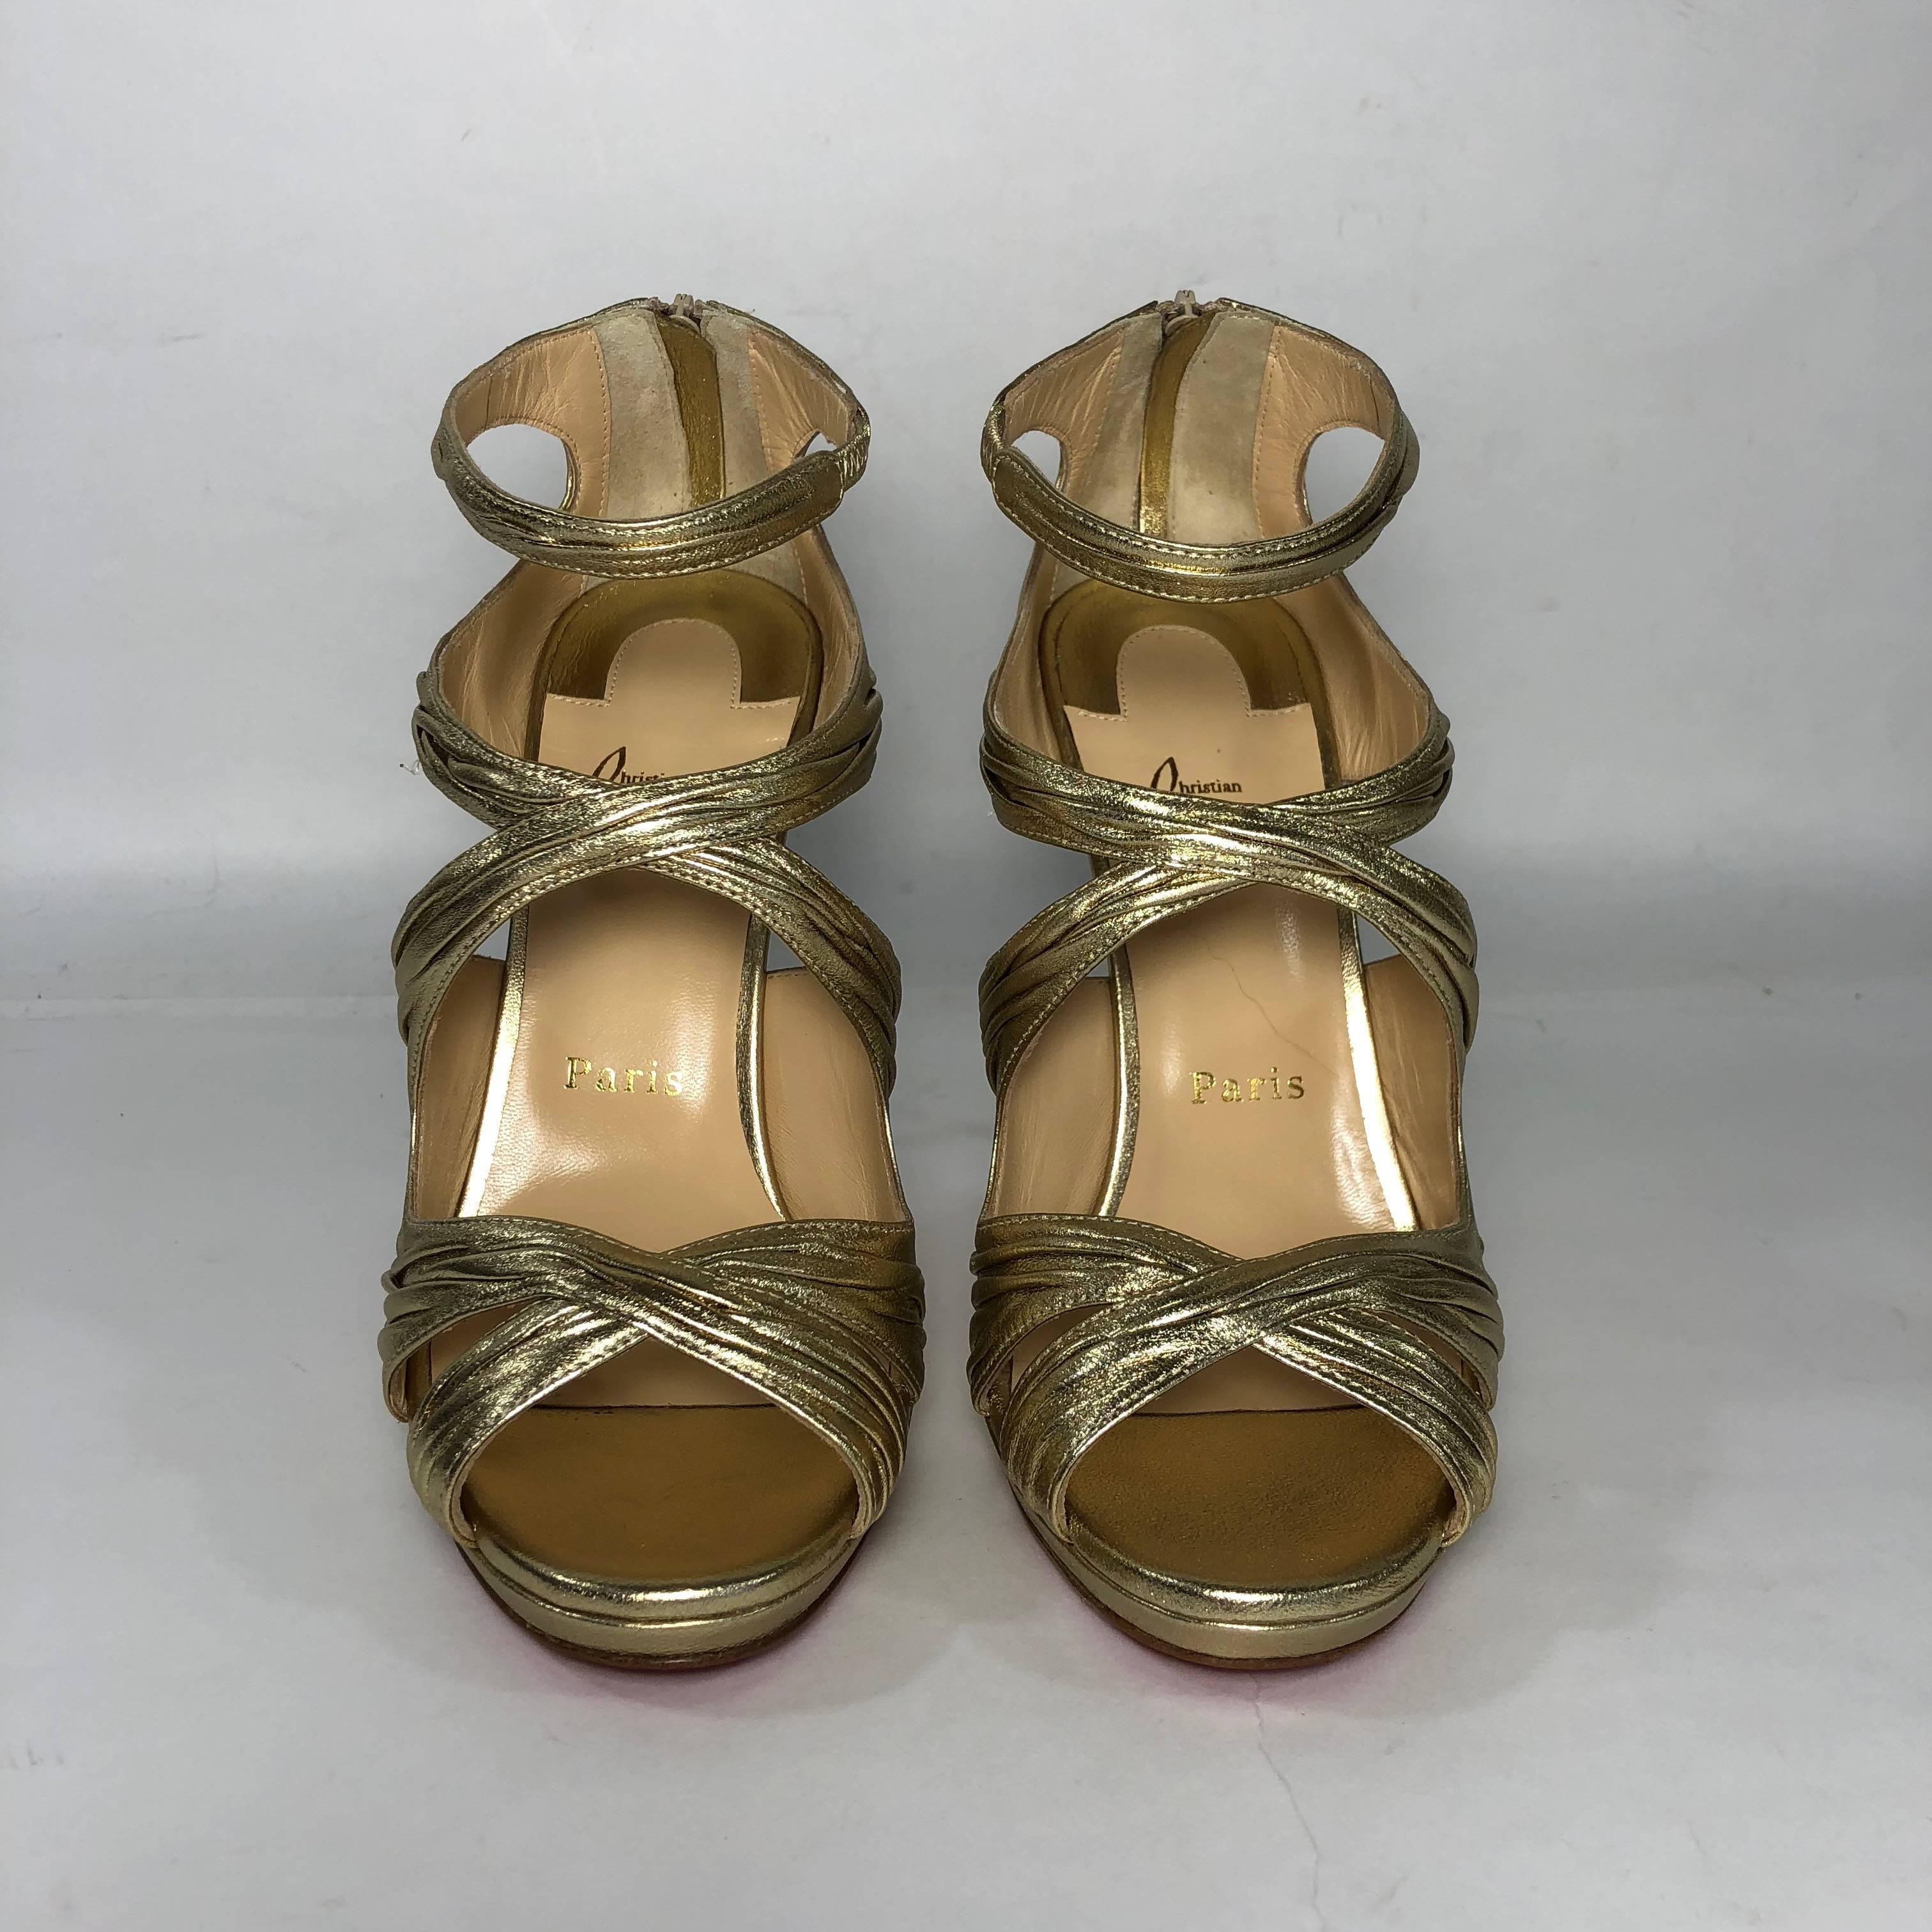 MODEL - Christian Louboutin Stiletto Kashou Nappa Laminata in Light Gold

CONDITION - New!  Never Worn.

SKU - 2158

ORIGINAL RETAIL PRICE - 1095 + tax

SIZE - Euro 39 or US 8.5 (Medium)

MATERIAL - Leather

HEEL HEIGHT - 4.75 inches

INTERIOR SOLE